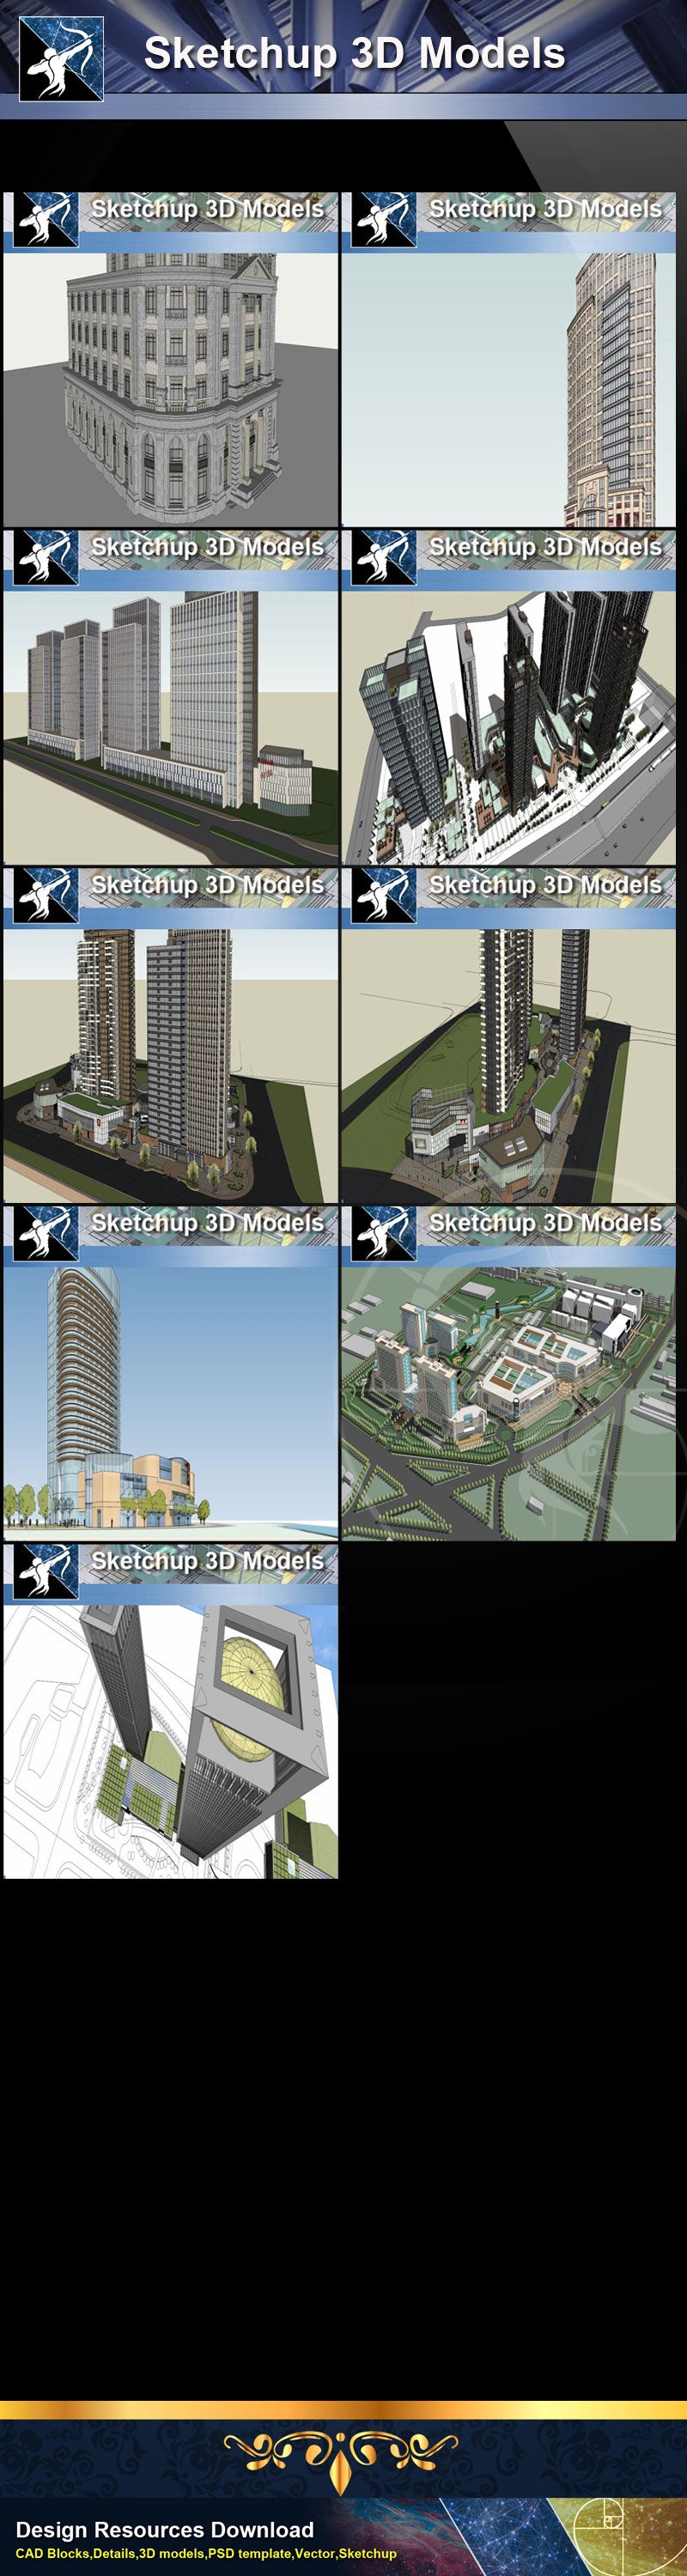 ★Best 37 Types of Commercial,Office Building Sketchup 3D Models Collection(Recommanded!!)